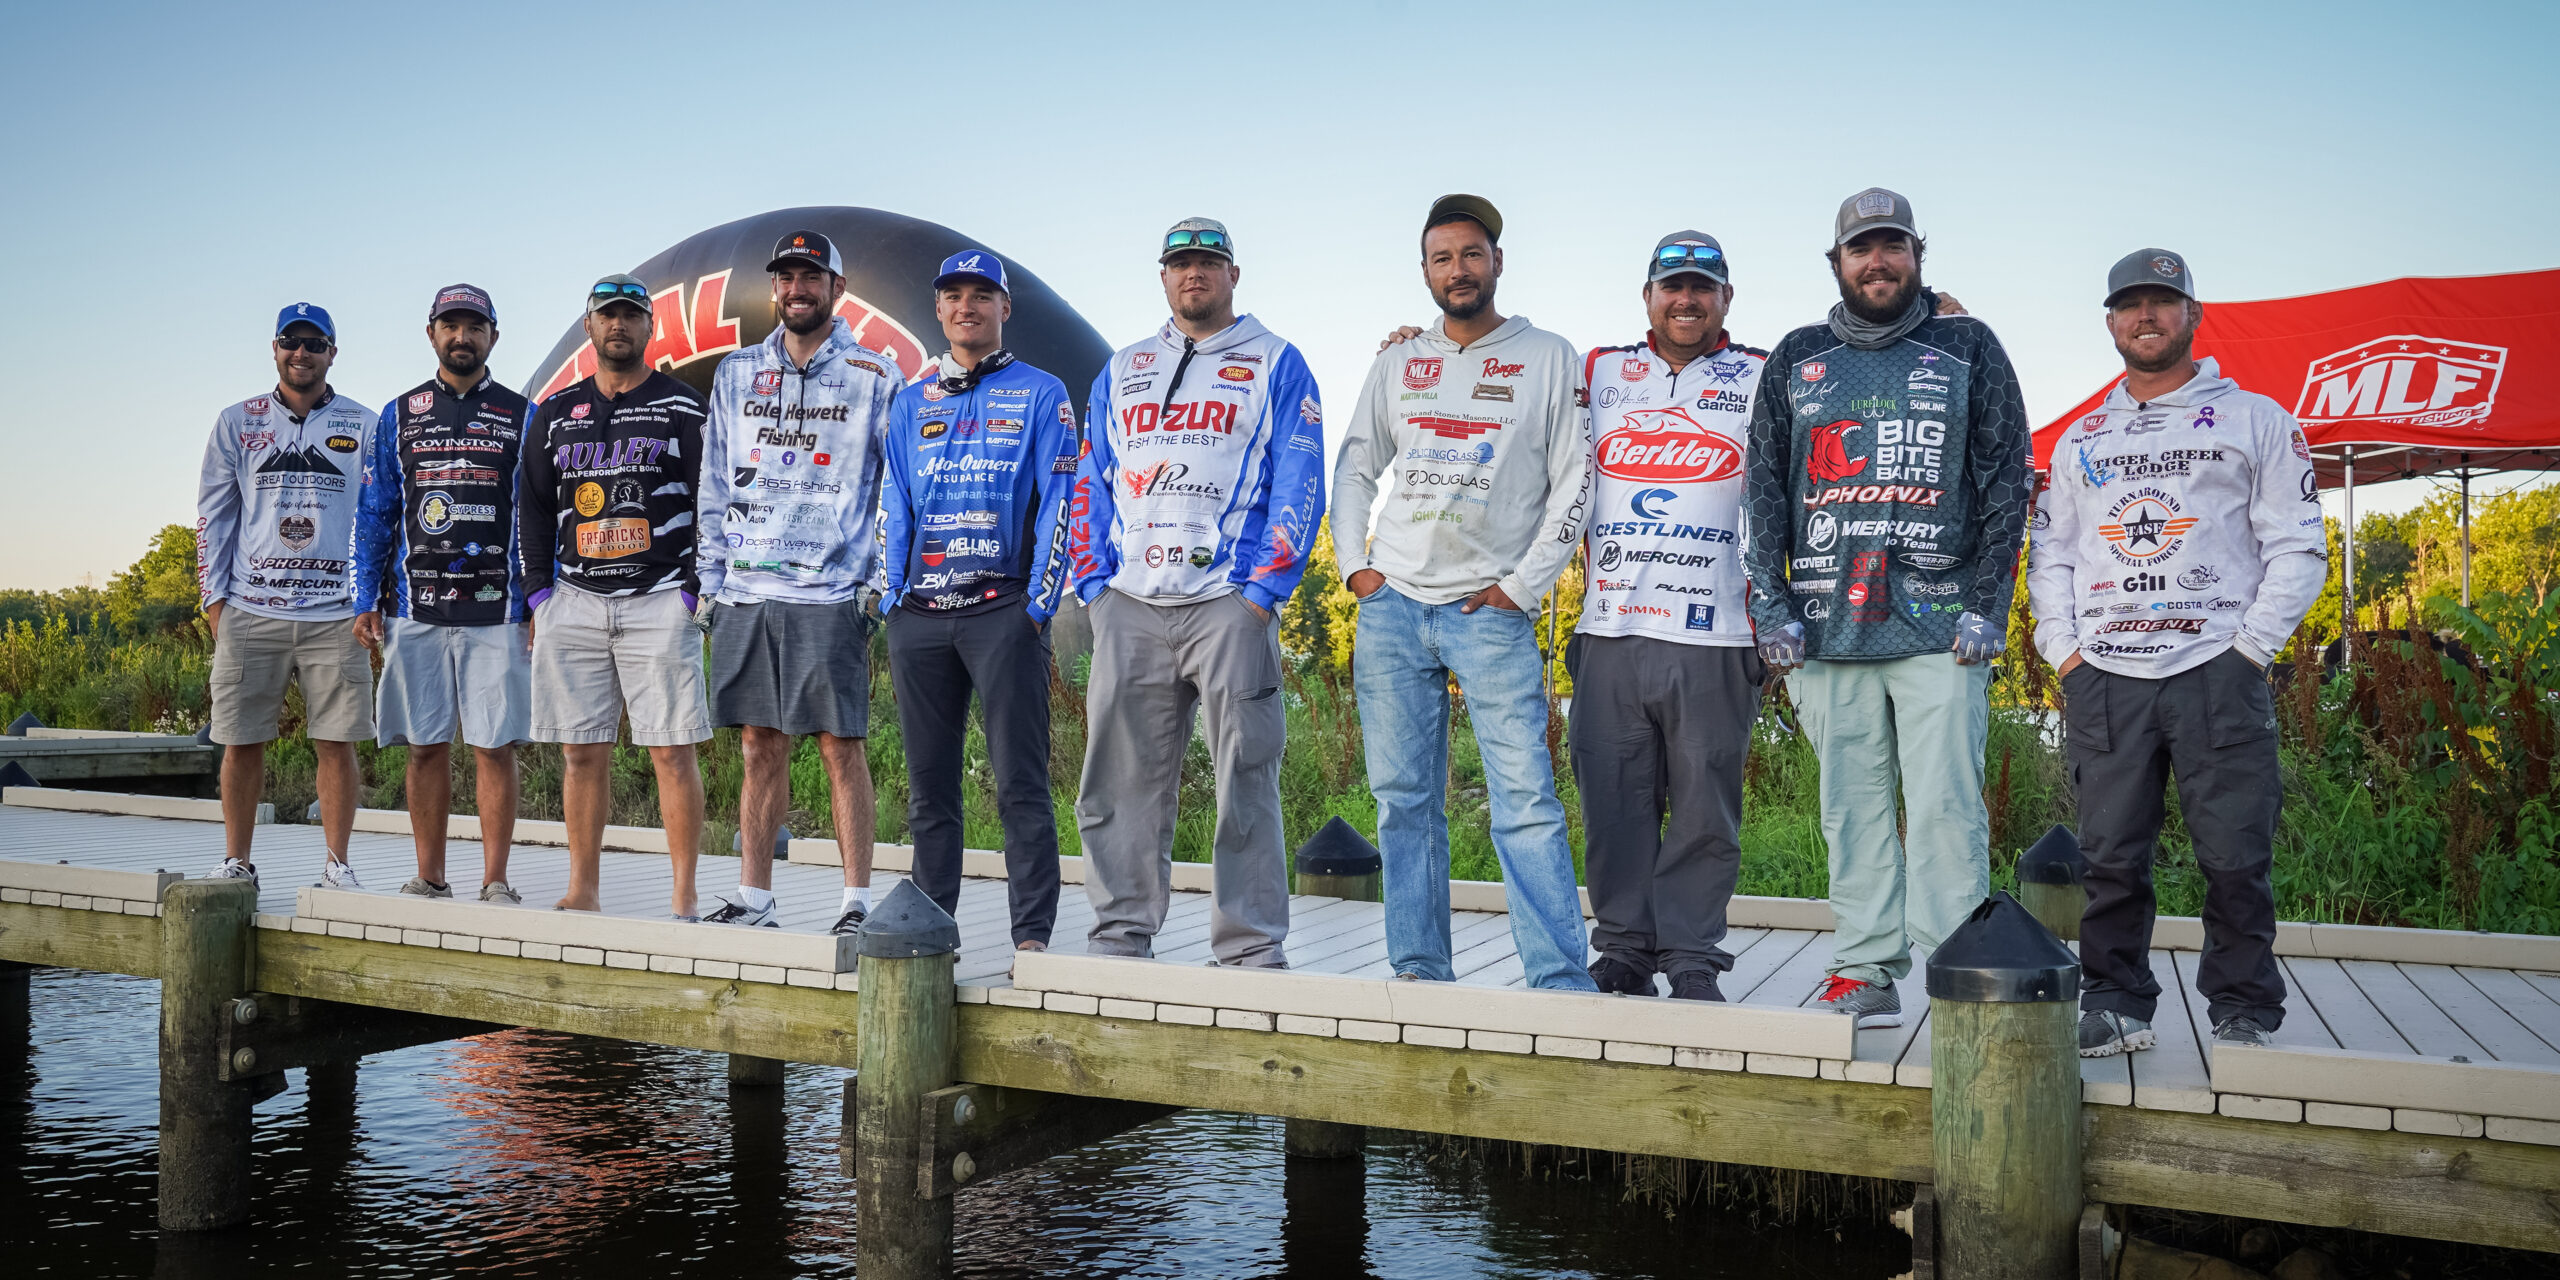 MORNING RESET Top 10 Take on Championship Sunday on the James River